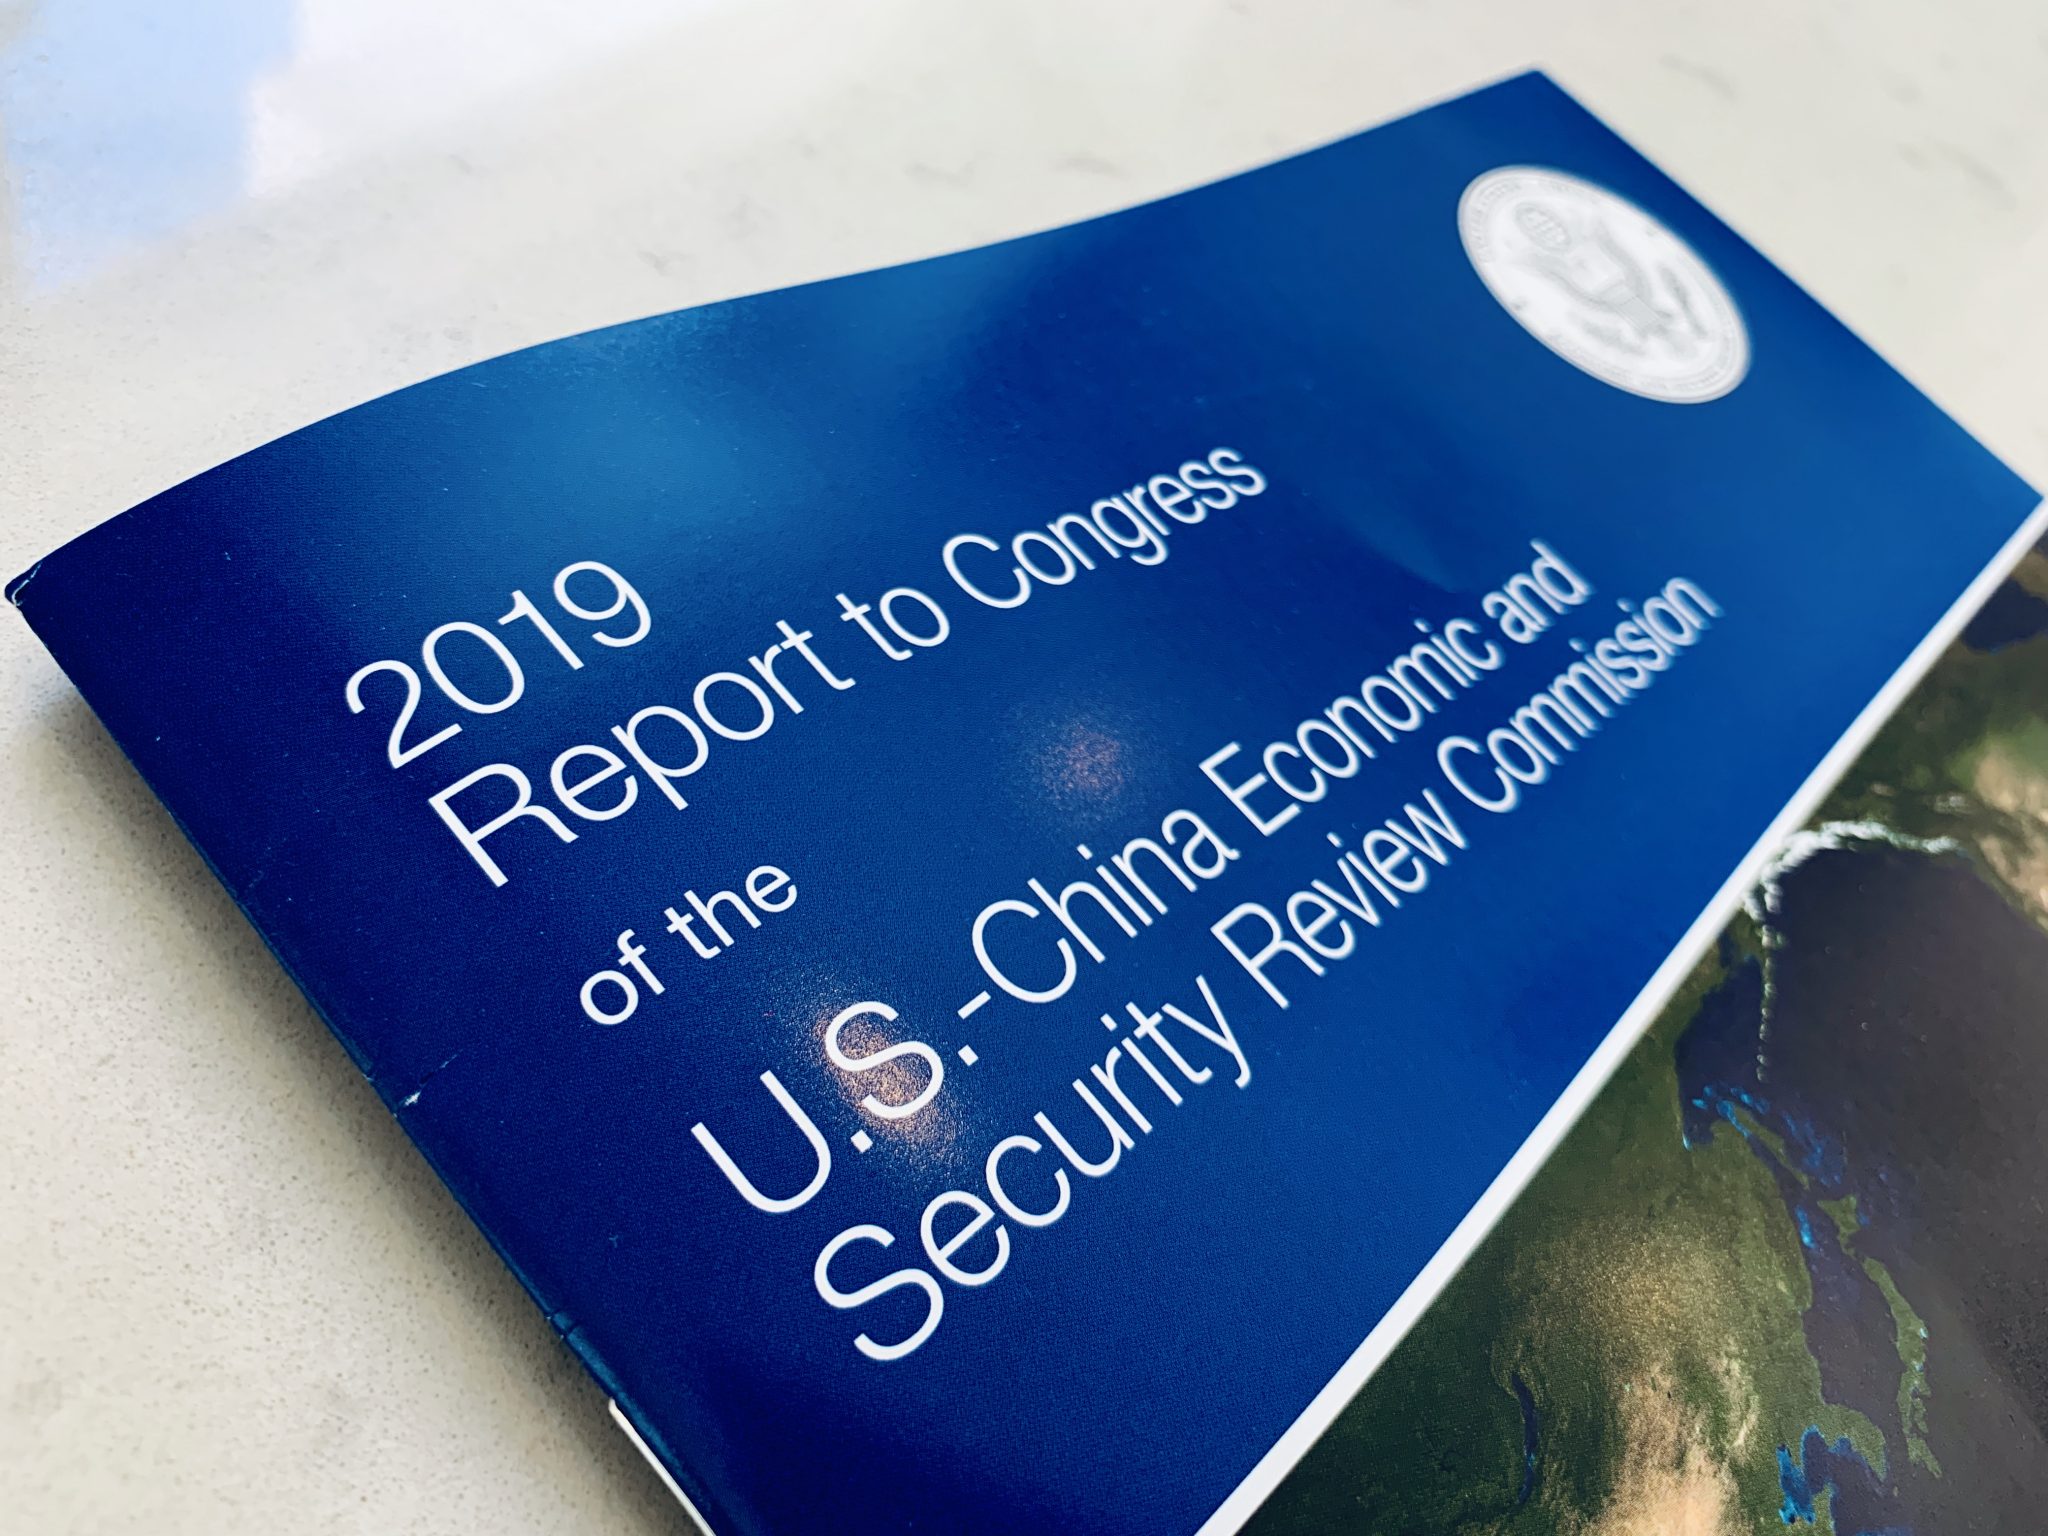 “Executive Summary and Recommendations” of the U.S.-China Economic and Security Review Commission 2019 Annual Report to Congress